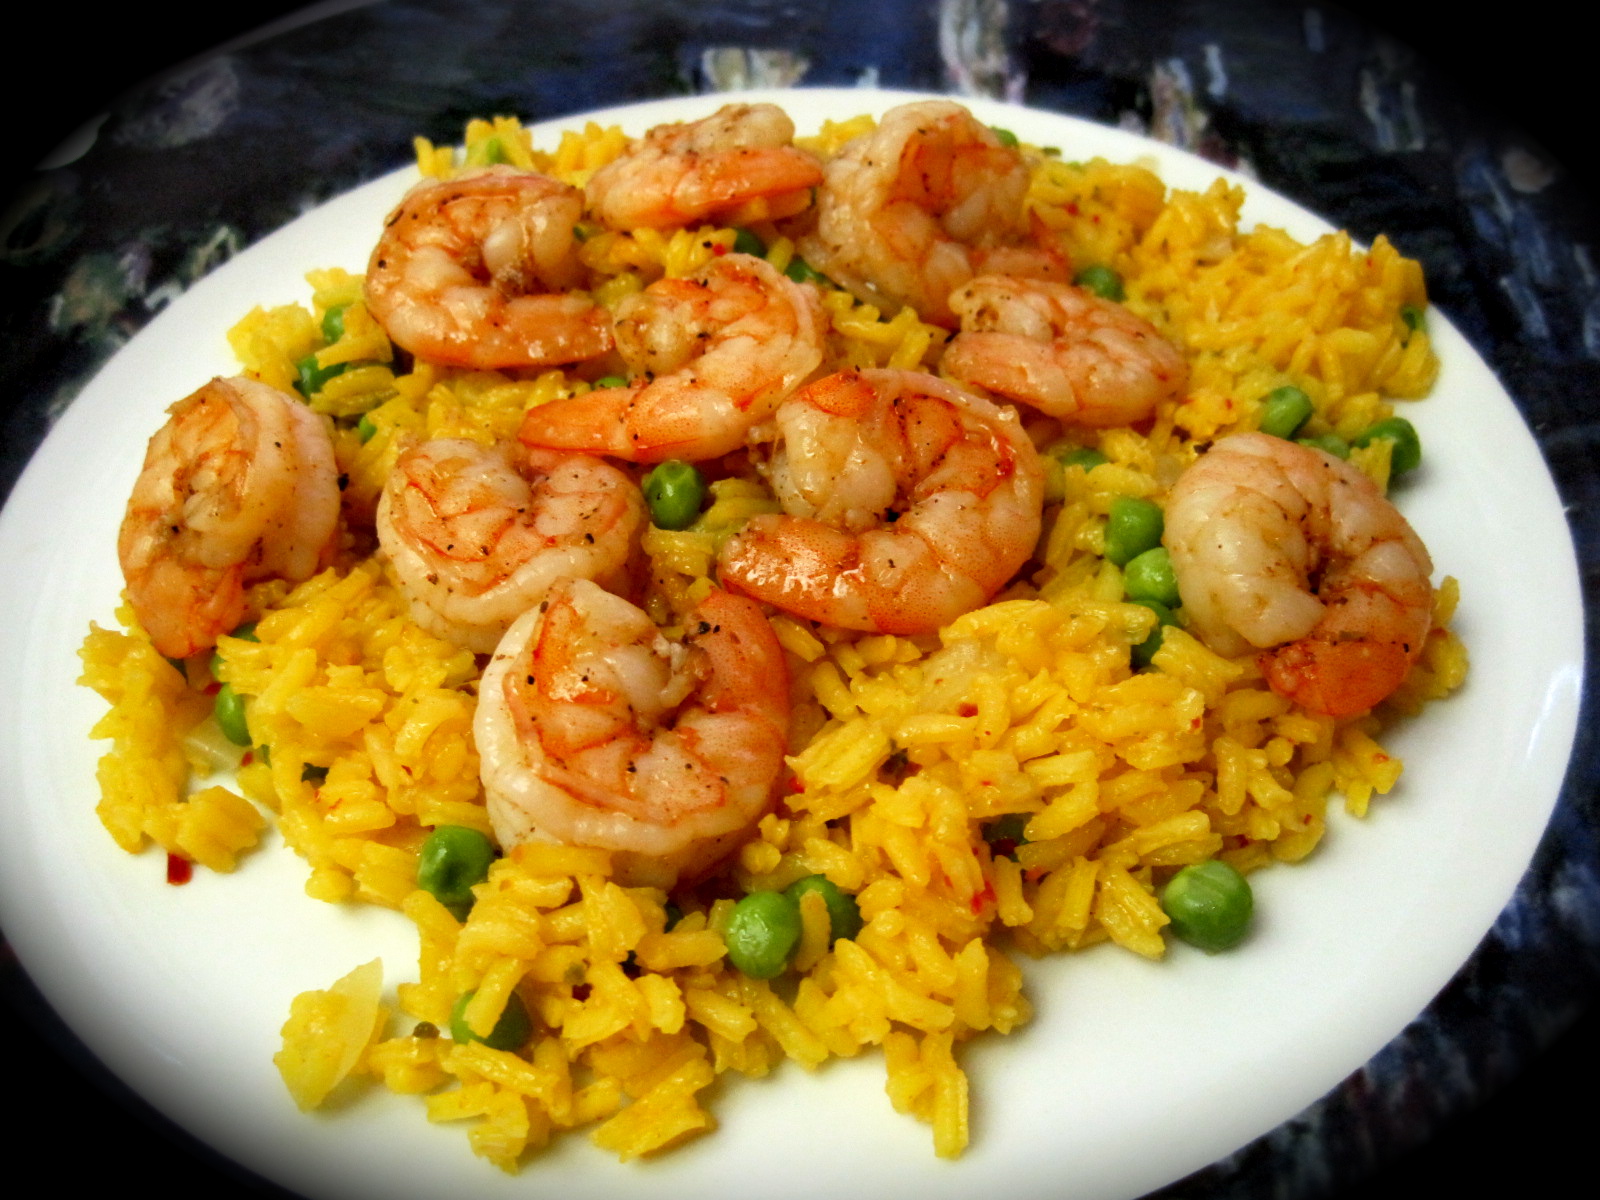 Scott S Blog What Else Would It Be Called Shrimp With Yellow Rice,How To Soundproof A Room From Outside Noise